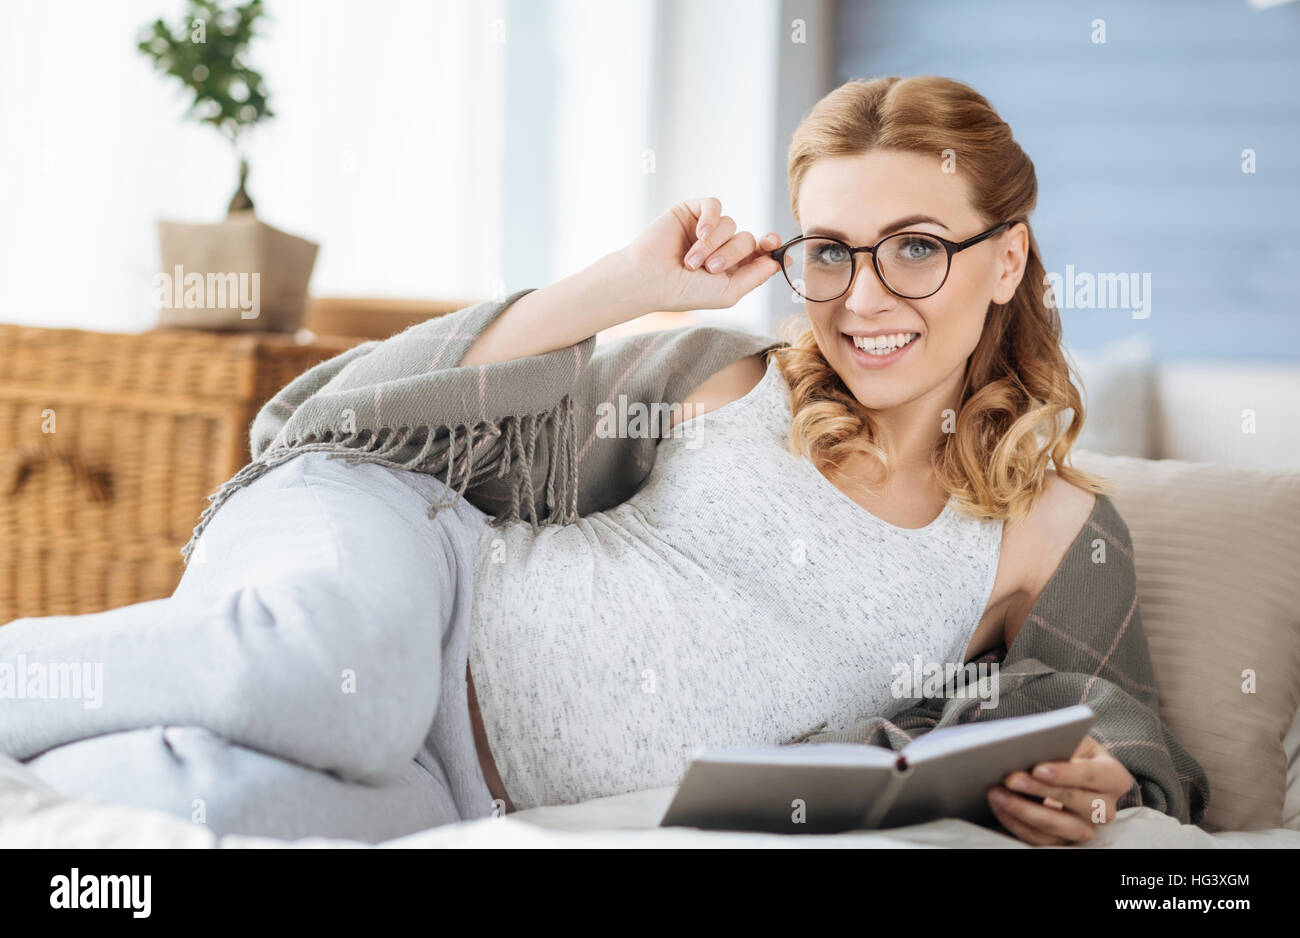 Pregnant woman reading book in bed Stock Photo